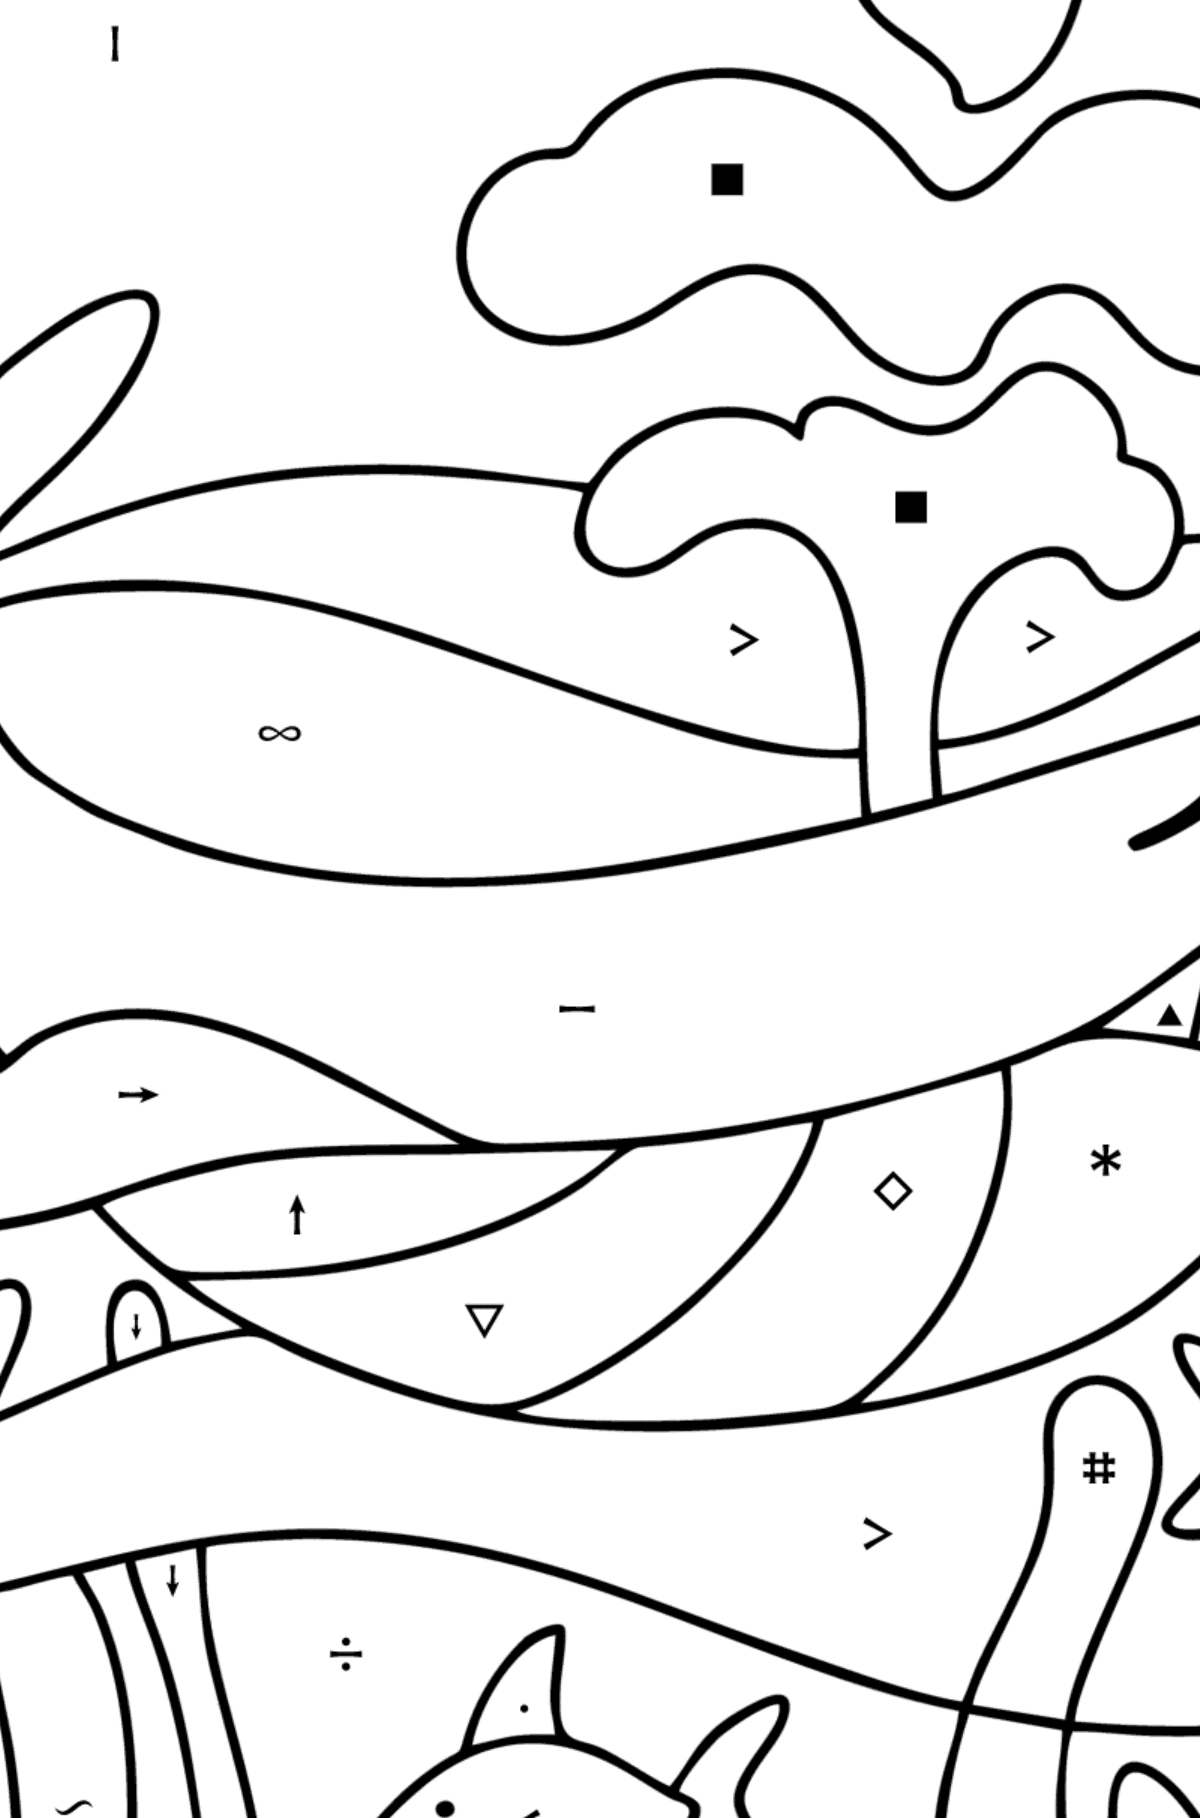 Cute sperm whale coloring page - Coloring by Symbols for Kids